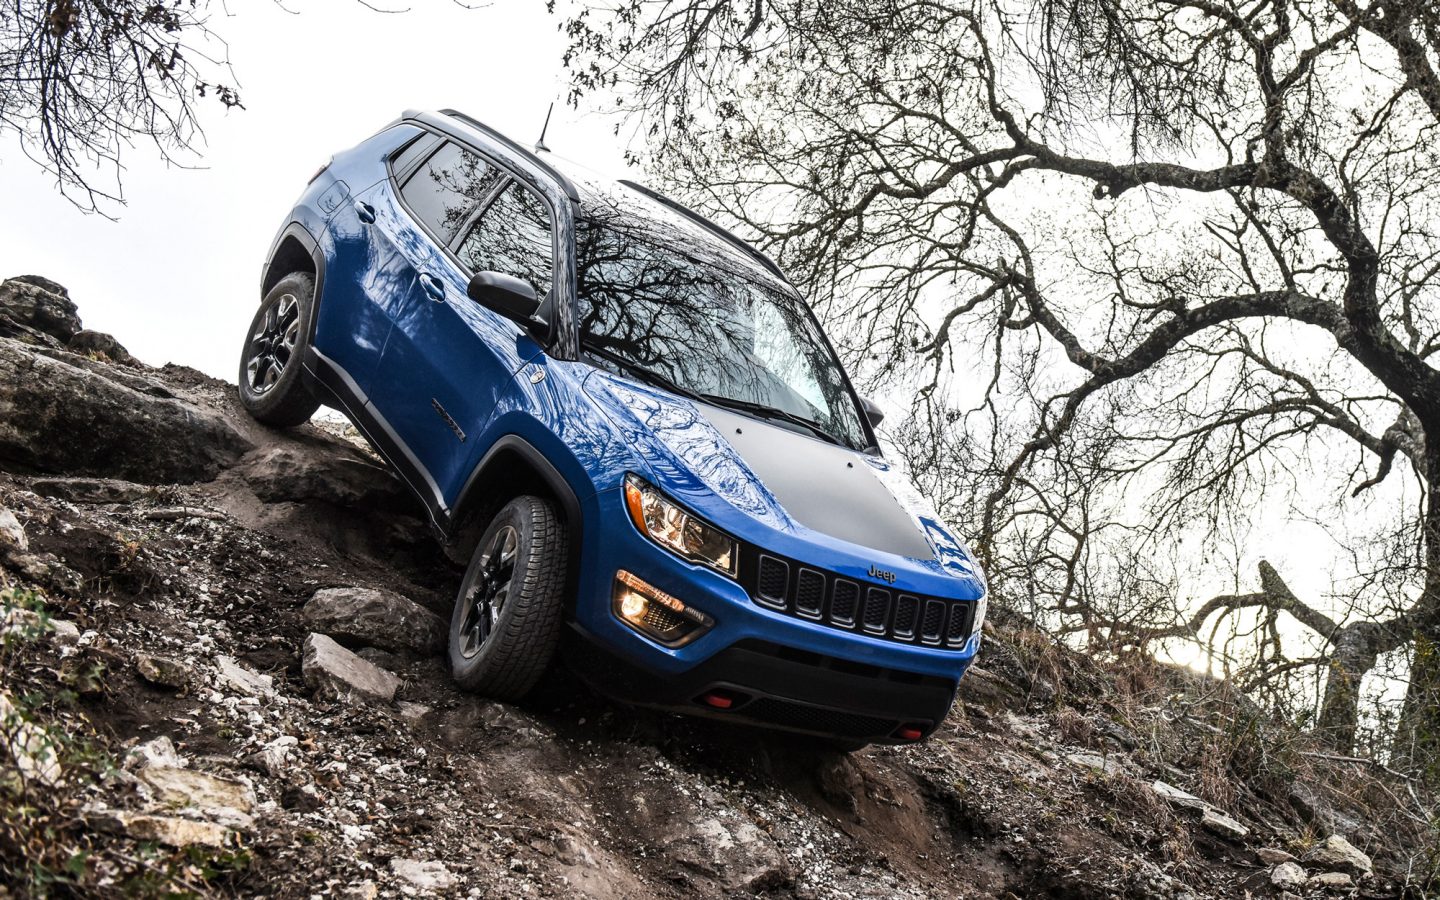 Trail Rated - Jeep® 4x4, Rubicon Trail & More